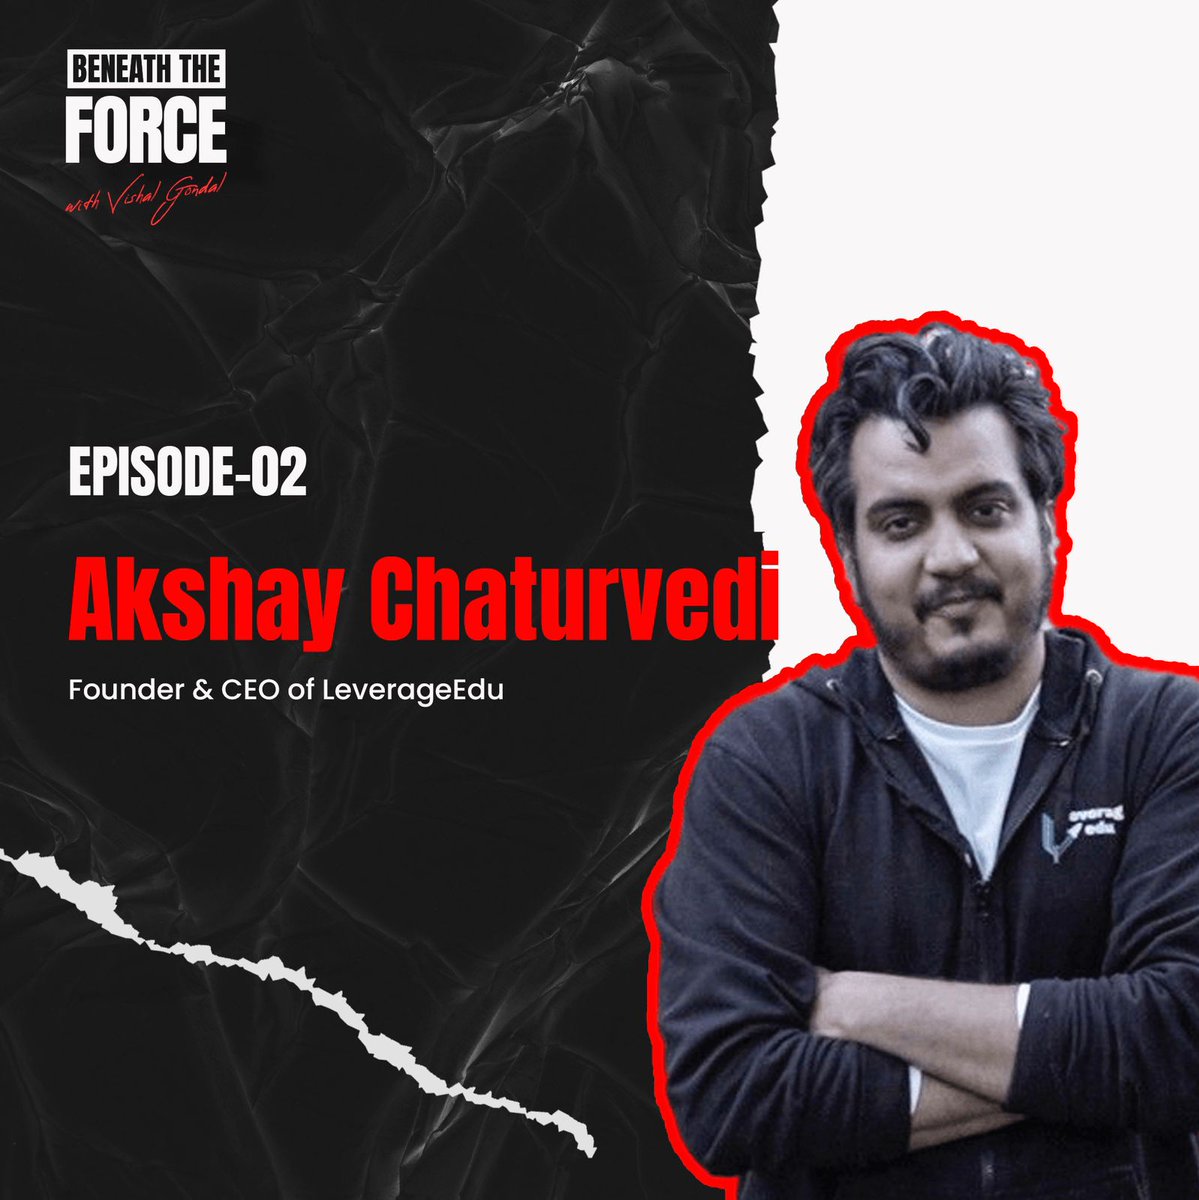 Hey friends In this 2nd episode I bring to you my conversation with a young entrepreneur @Akshay001  who strongly believes that access to higher education must be democratised, so that a common person never loses out #BeneathTheForce @leverageedu

open.spotify.com/episode/1IABuo…